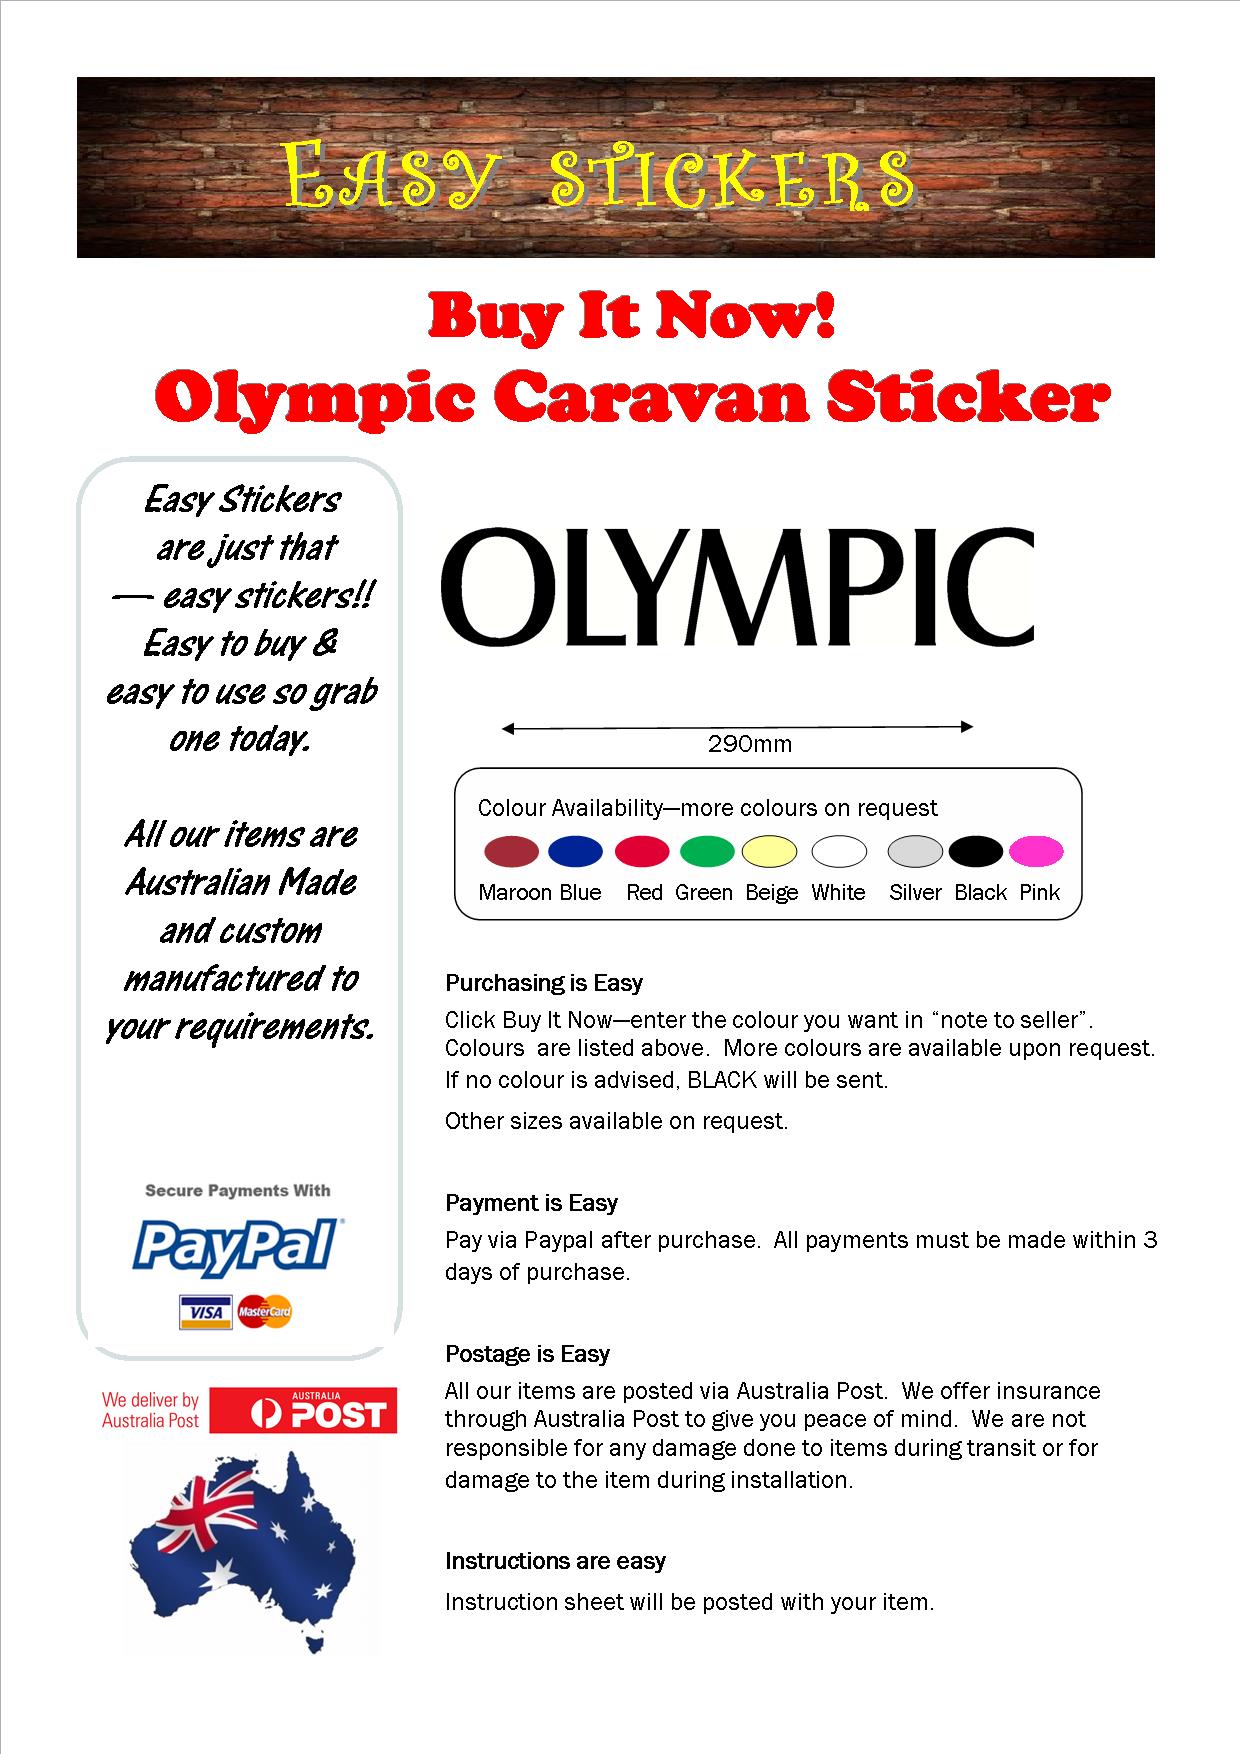 Ebay Template 290mm olympic text.jpg  by easystickers